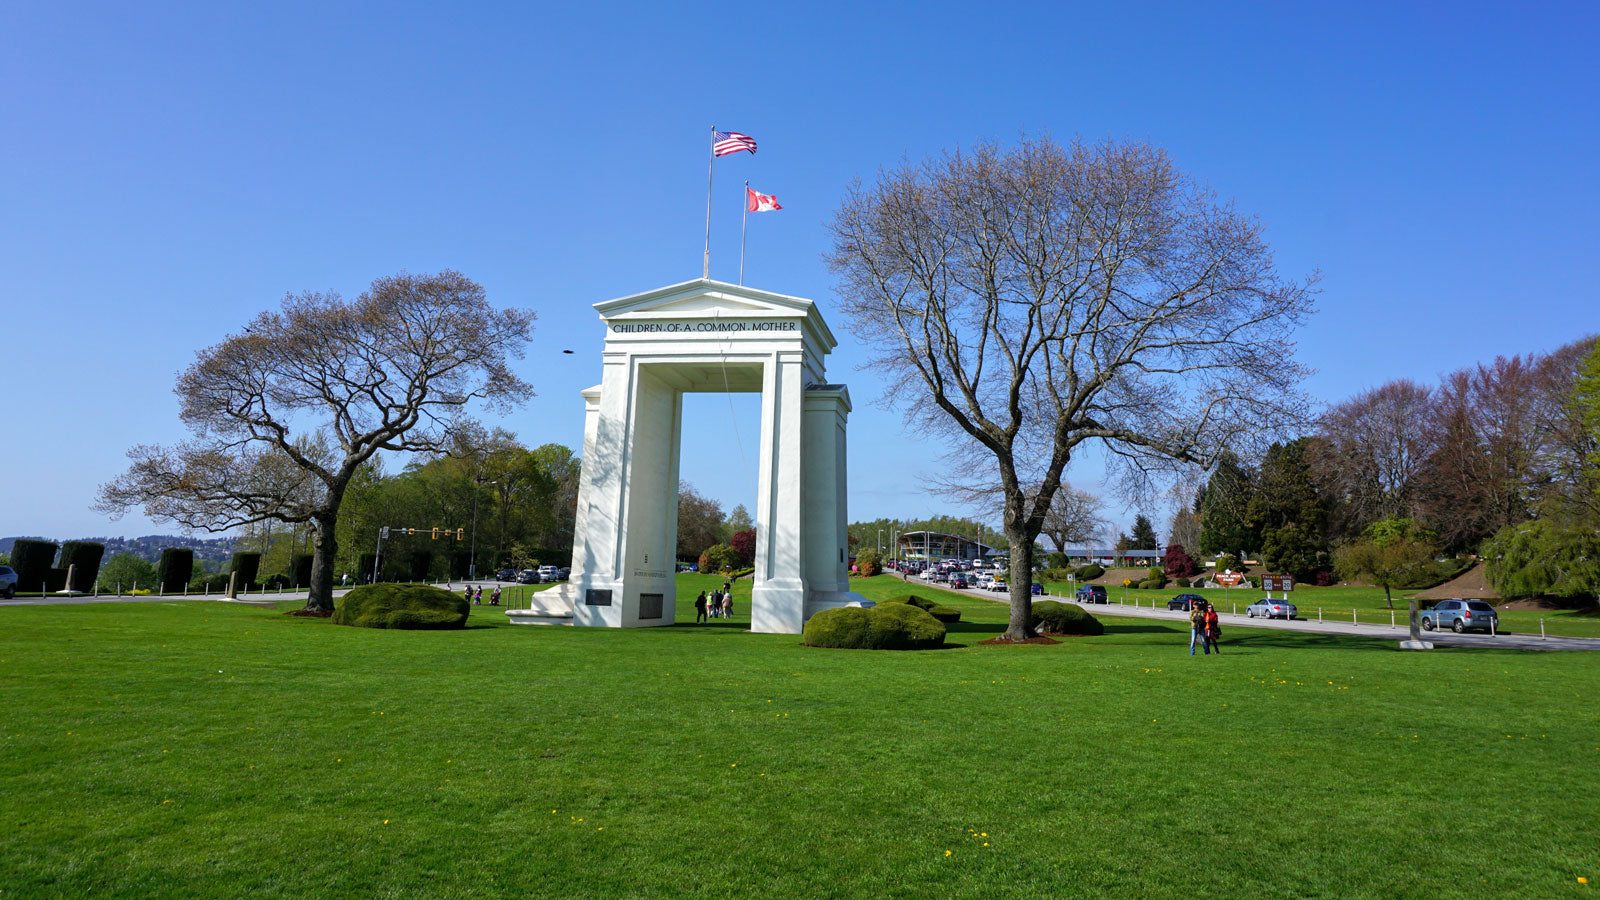 Six Little Known Attractions in Washington State - International Peace Arch